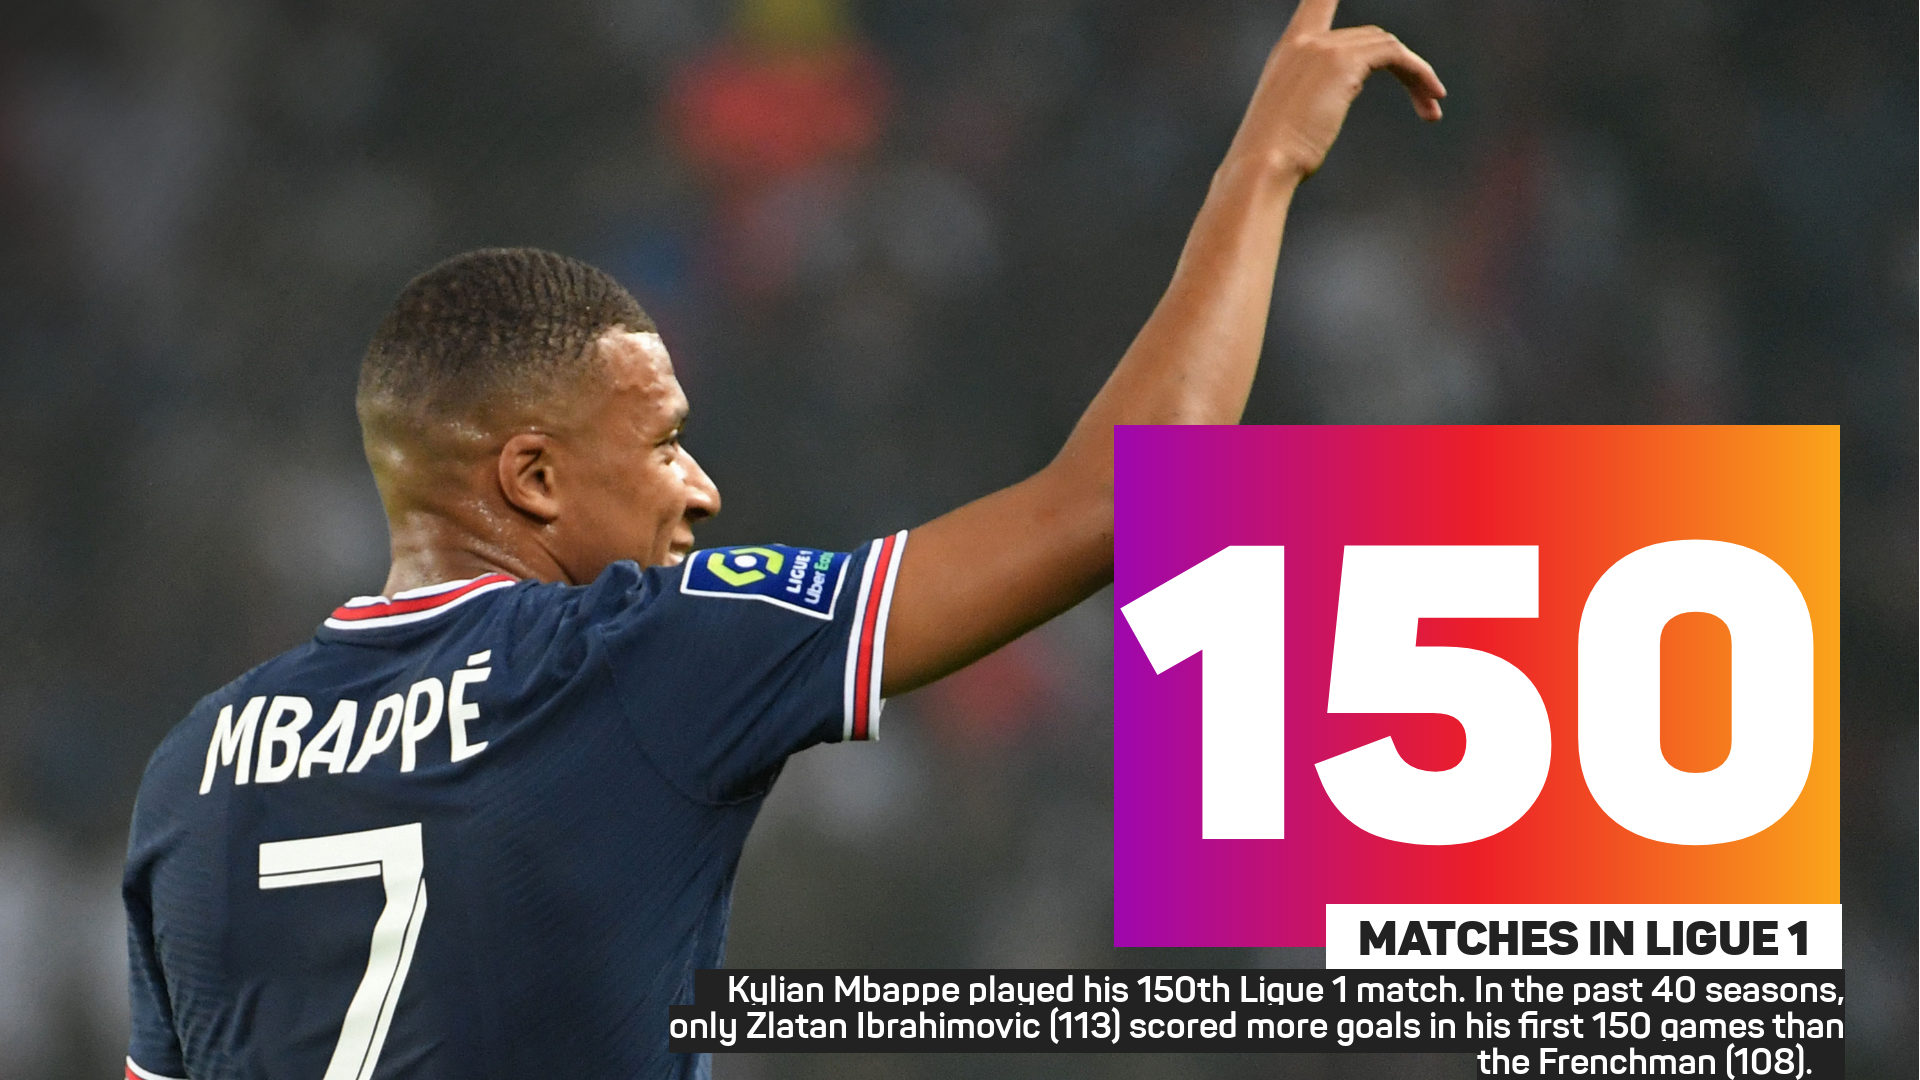 Kylian Mbappe played his 150th Ligue 1 match. In the past 40 seasons, only Zlatan Ibrahimovic (113) scored more goals in his first 150 games than the Frenchman (108).